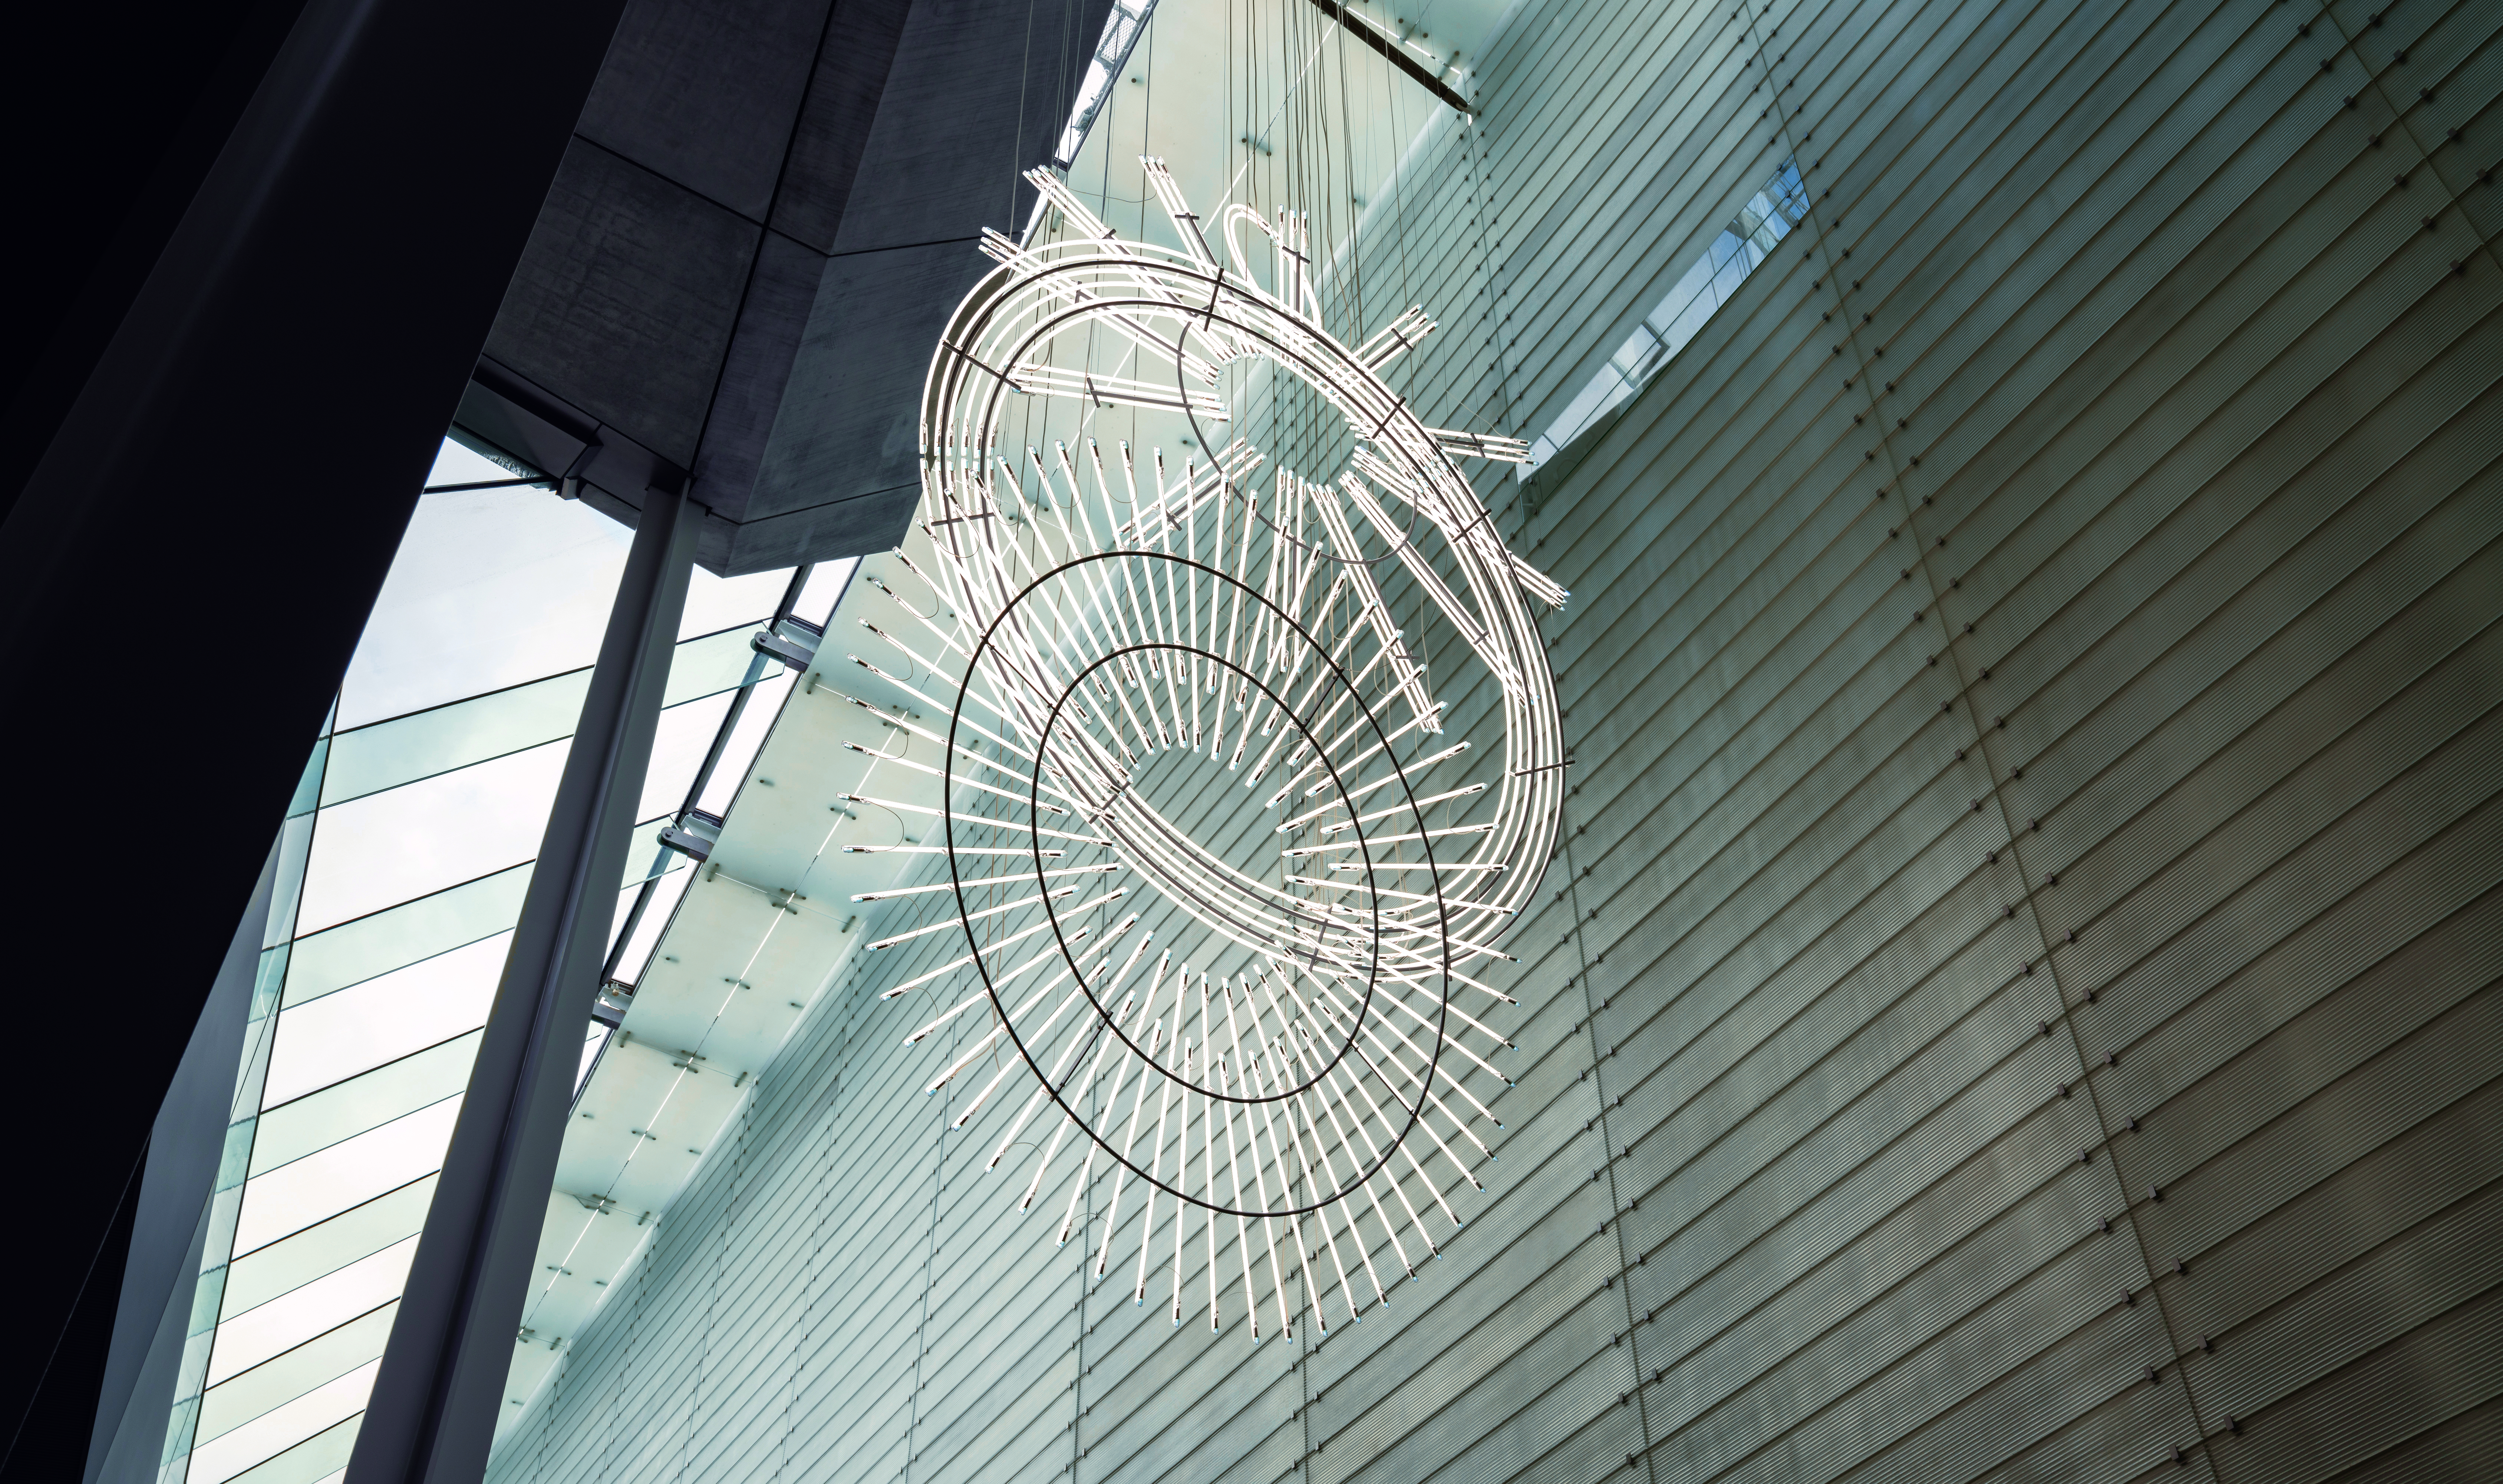 Cerith Wyn Evans, The Illuminating Gas…(after Oculist Witnesses), 2015. Artwork